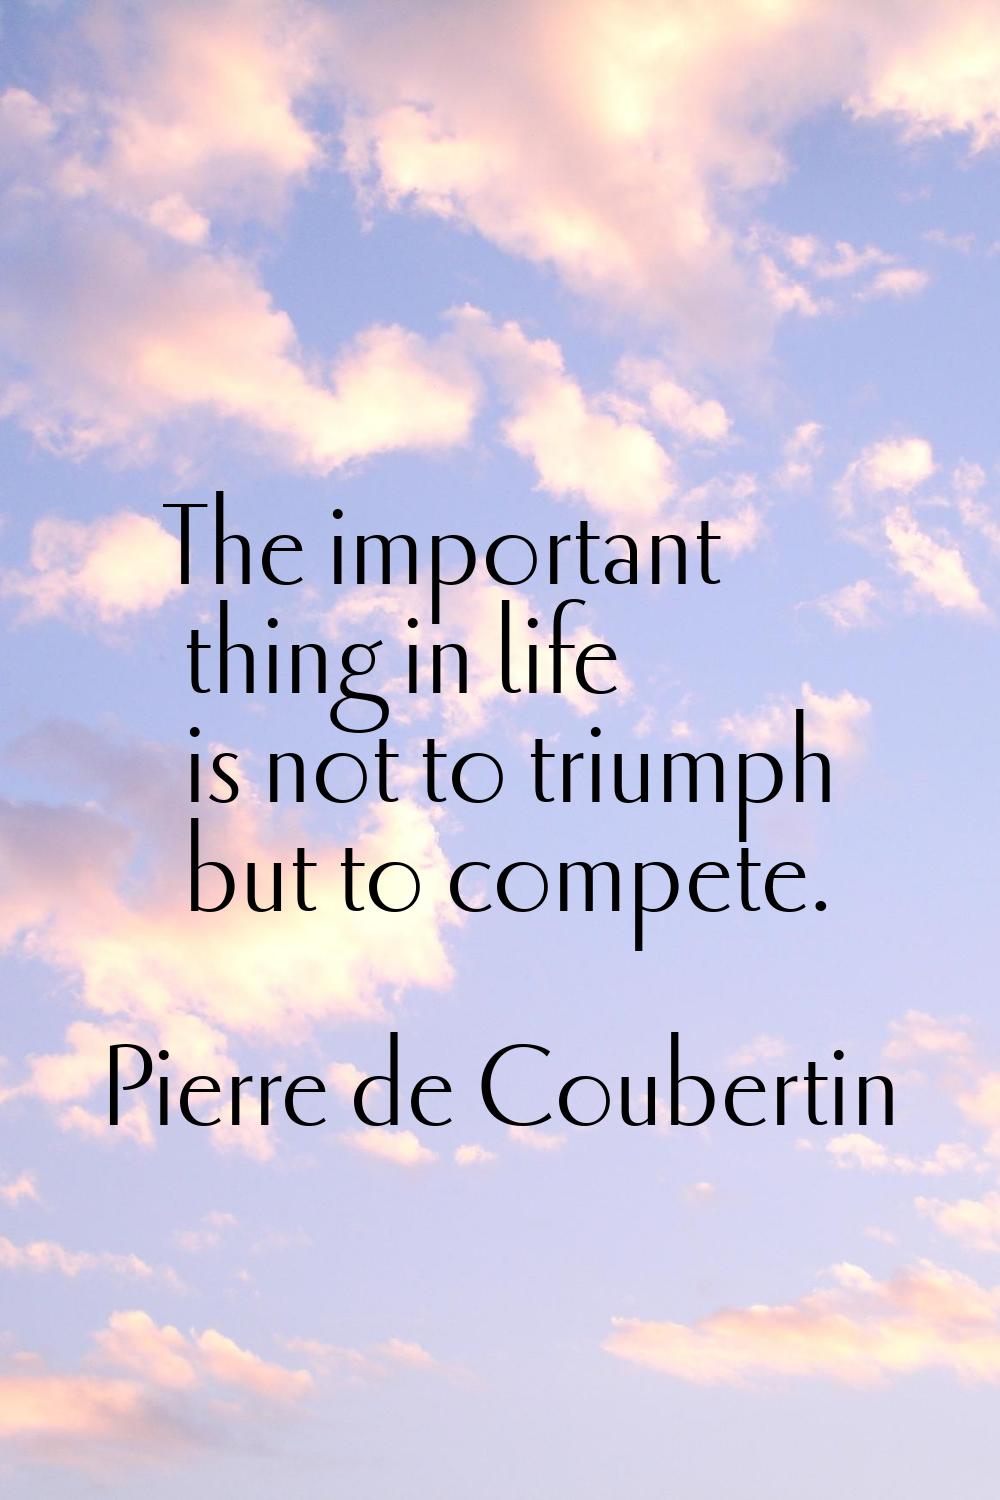 The important thing in life is not to triumph but to compete.